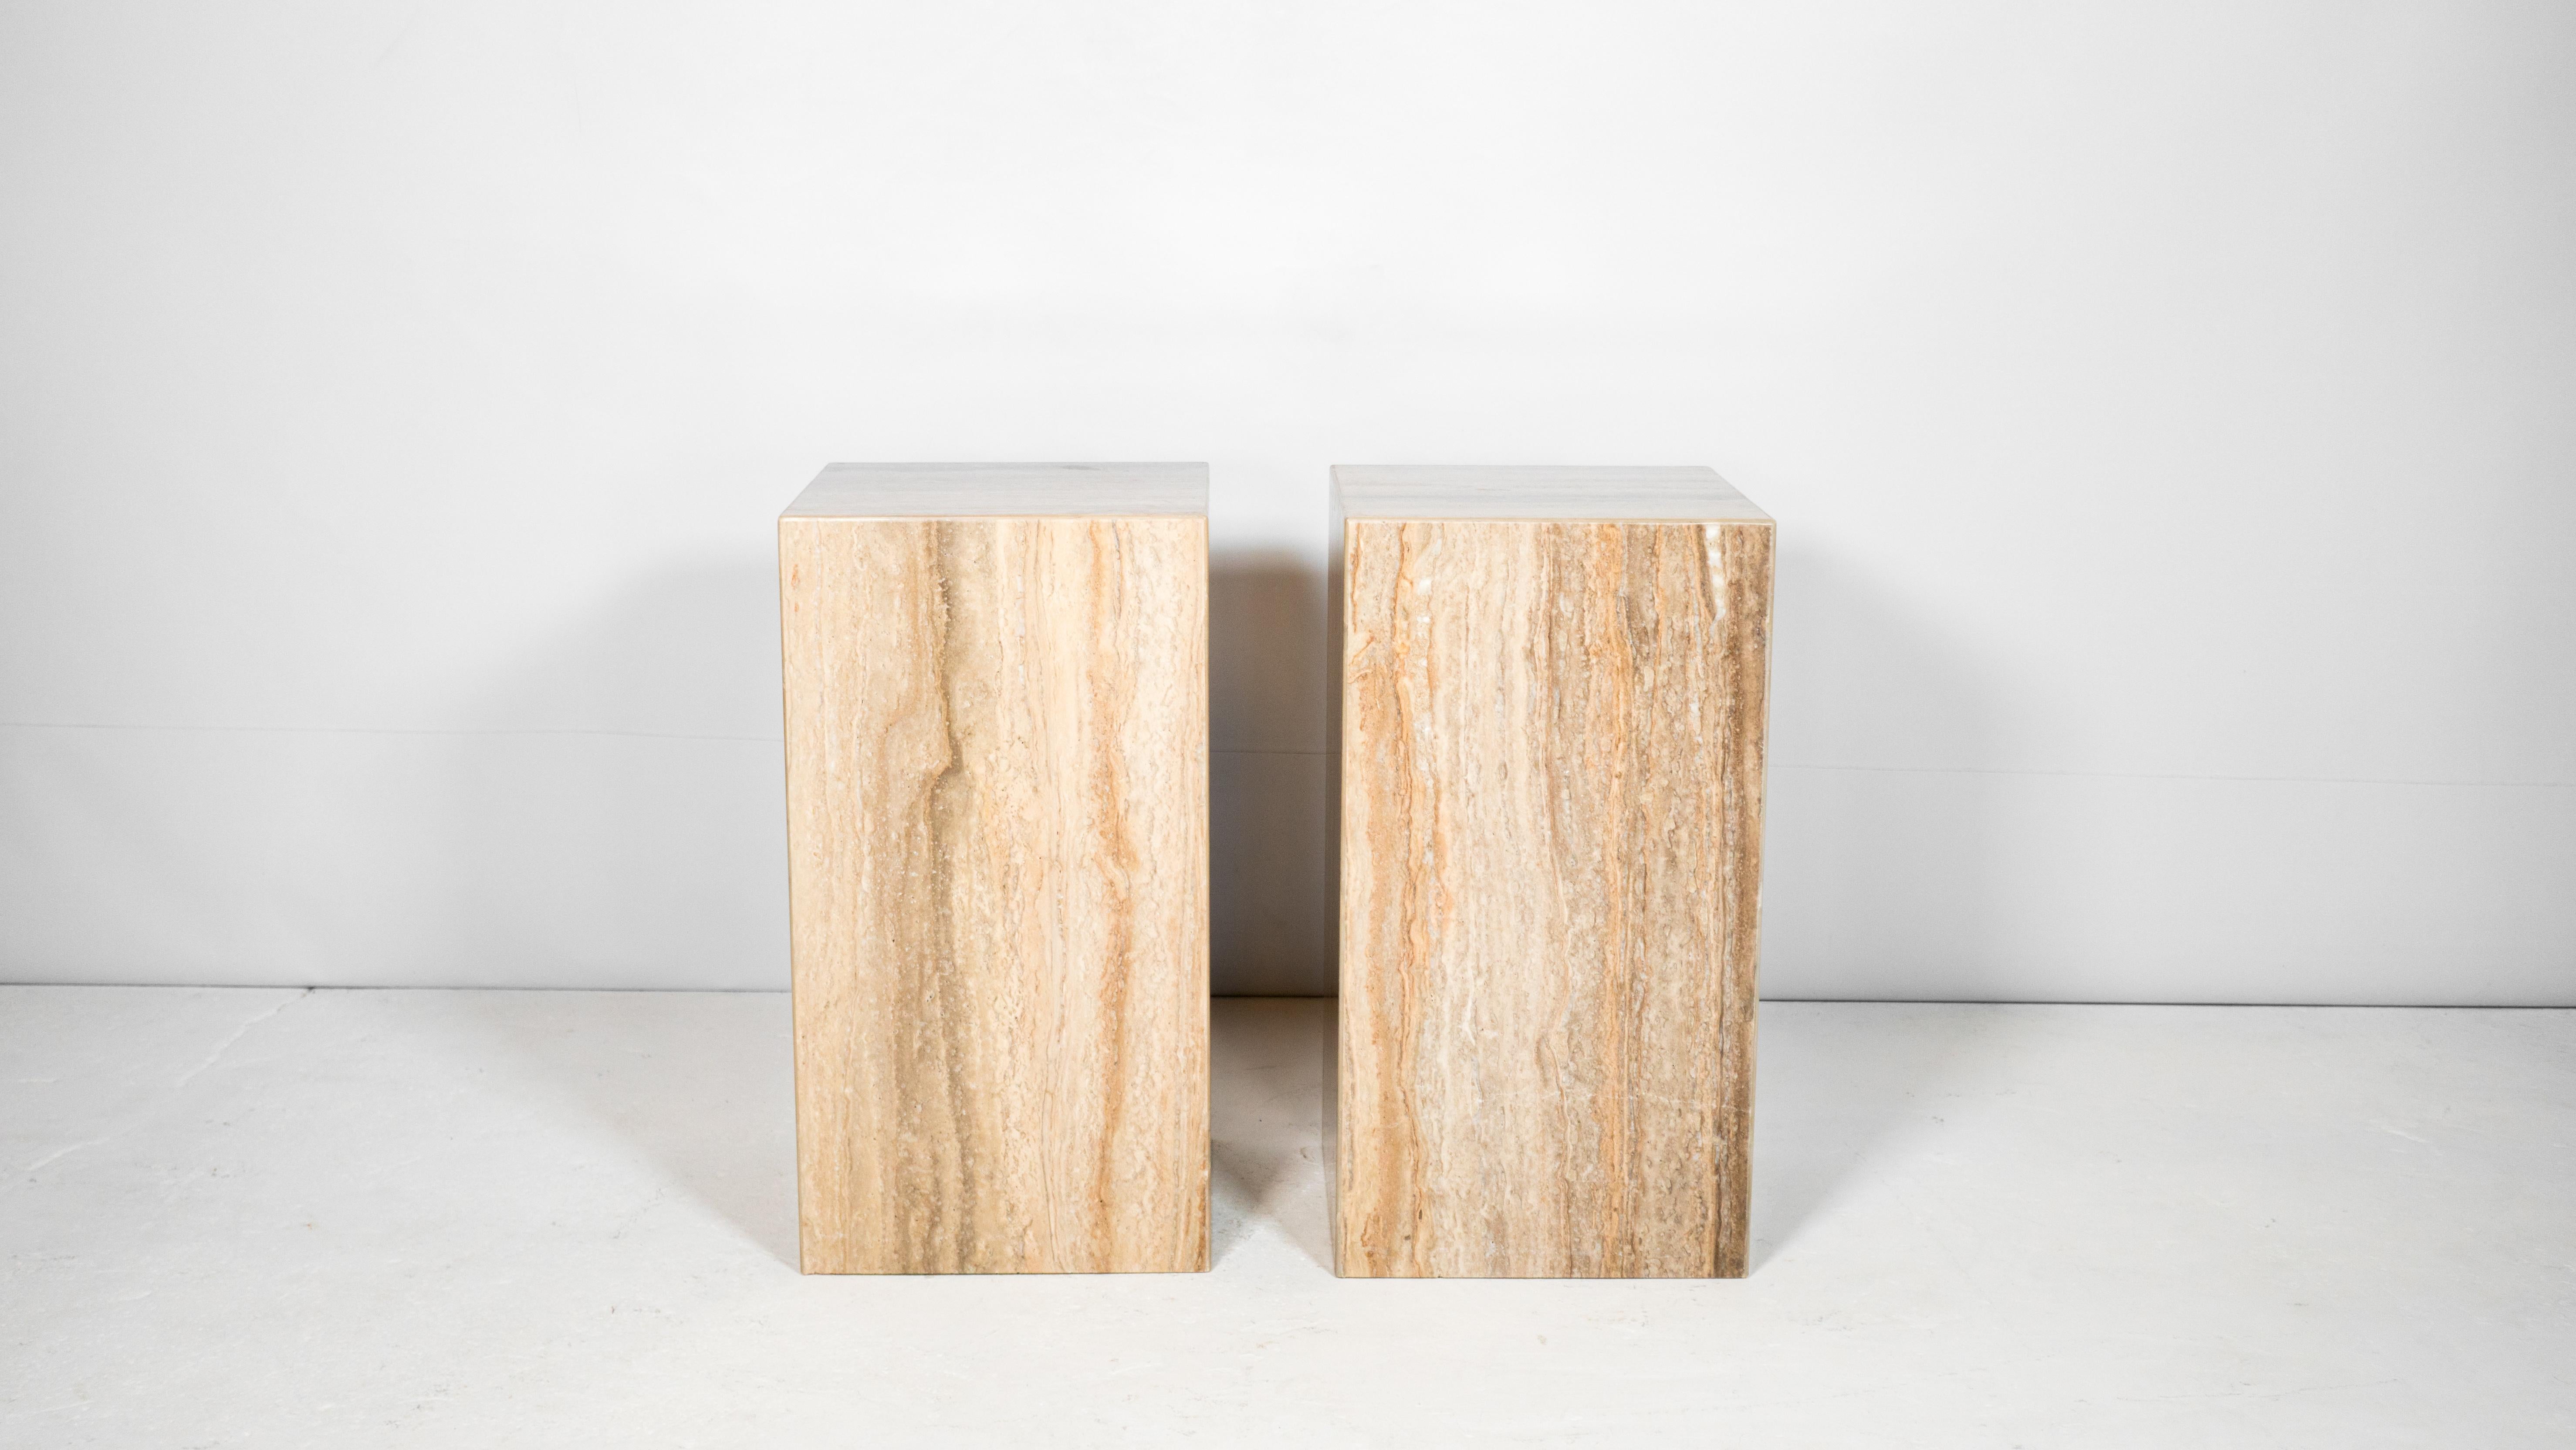 Impressive pair of large Italian travertine side tables, circa 1980s. Beautiful grain seen throughout the polished stone with vibrant neutral earth tones and hues. Presence offer elegance while maintaining minimalist design. Rectangle cuboid shape